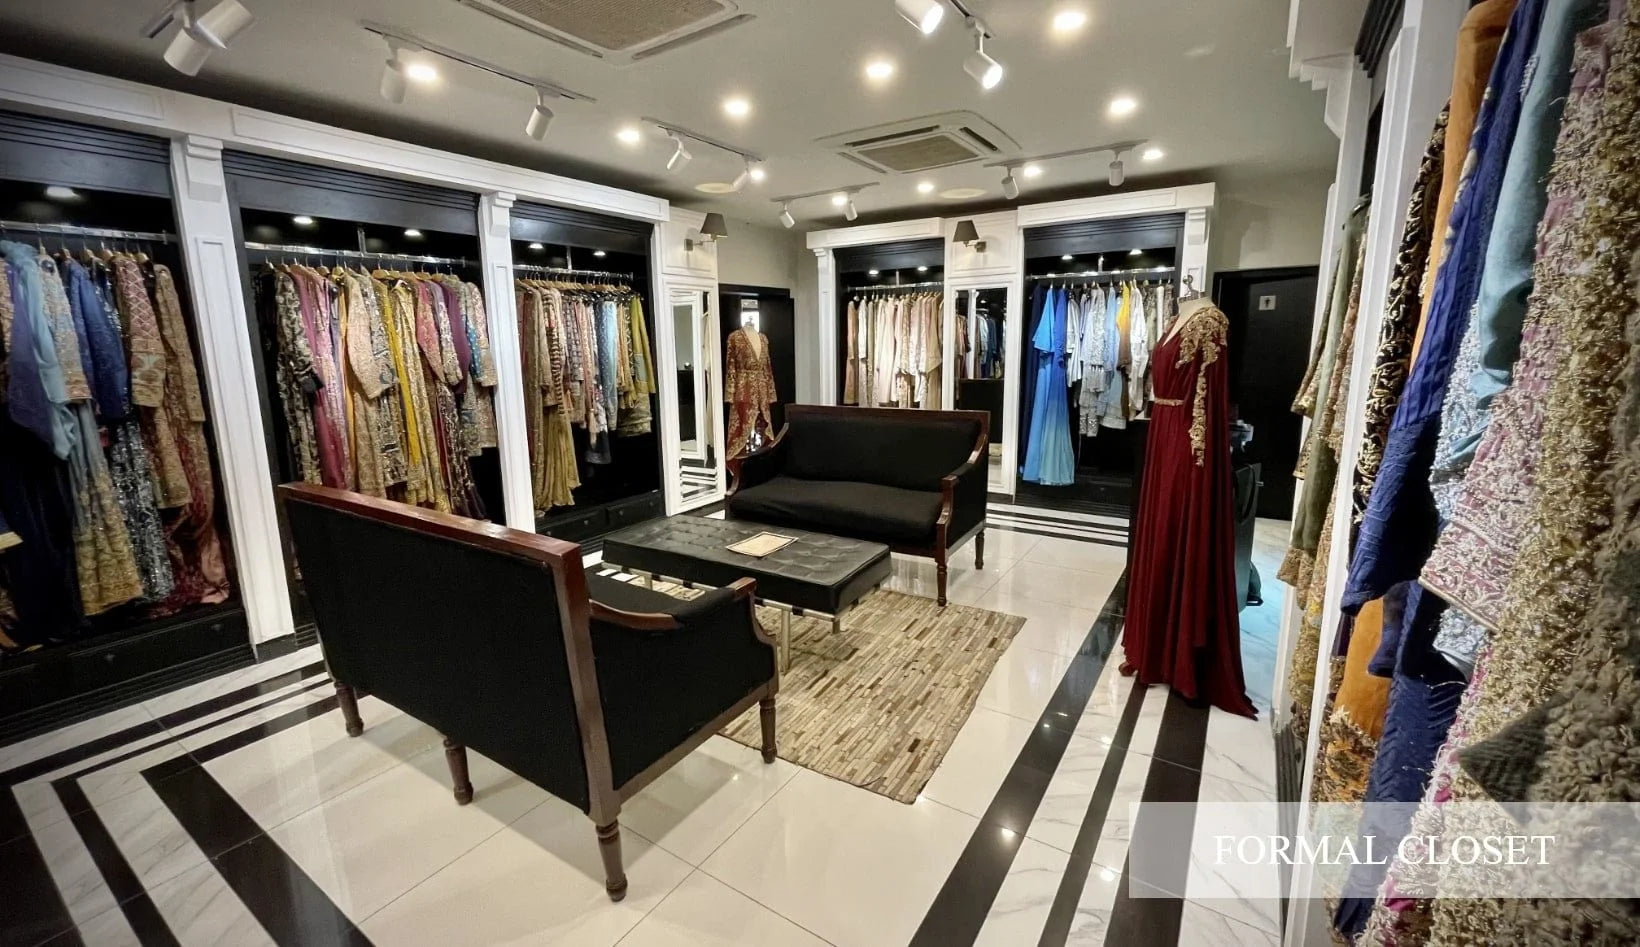 HSY Mansion Fromal Closet